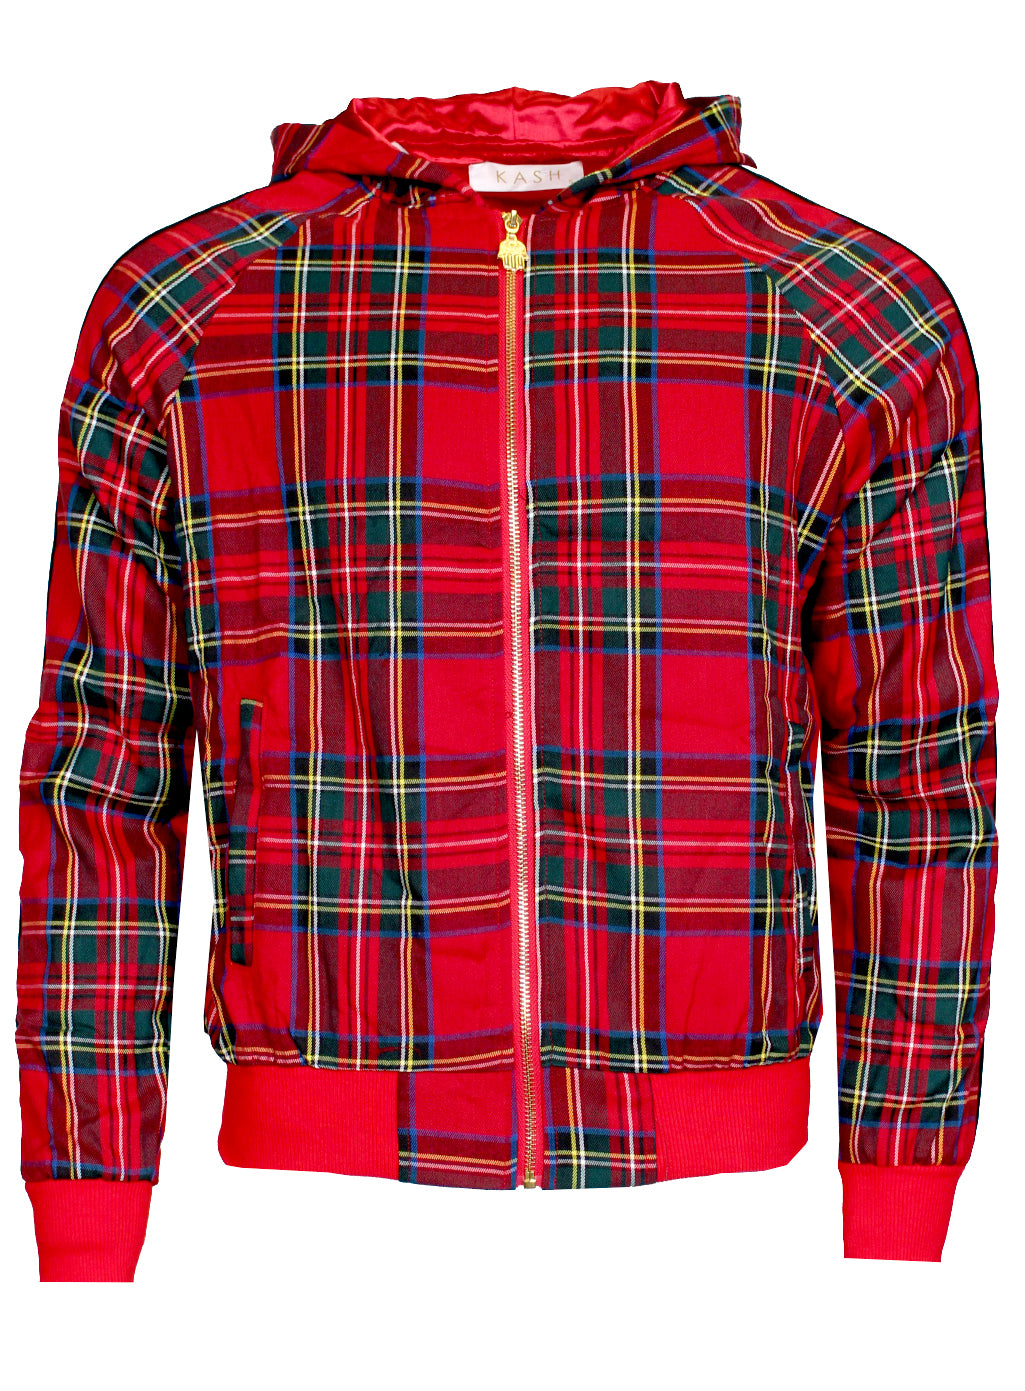 Men's Long Sleeve Plaid Track Jacket from 'Private School Collection'-Red